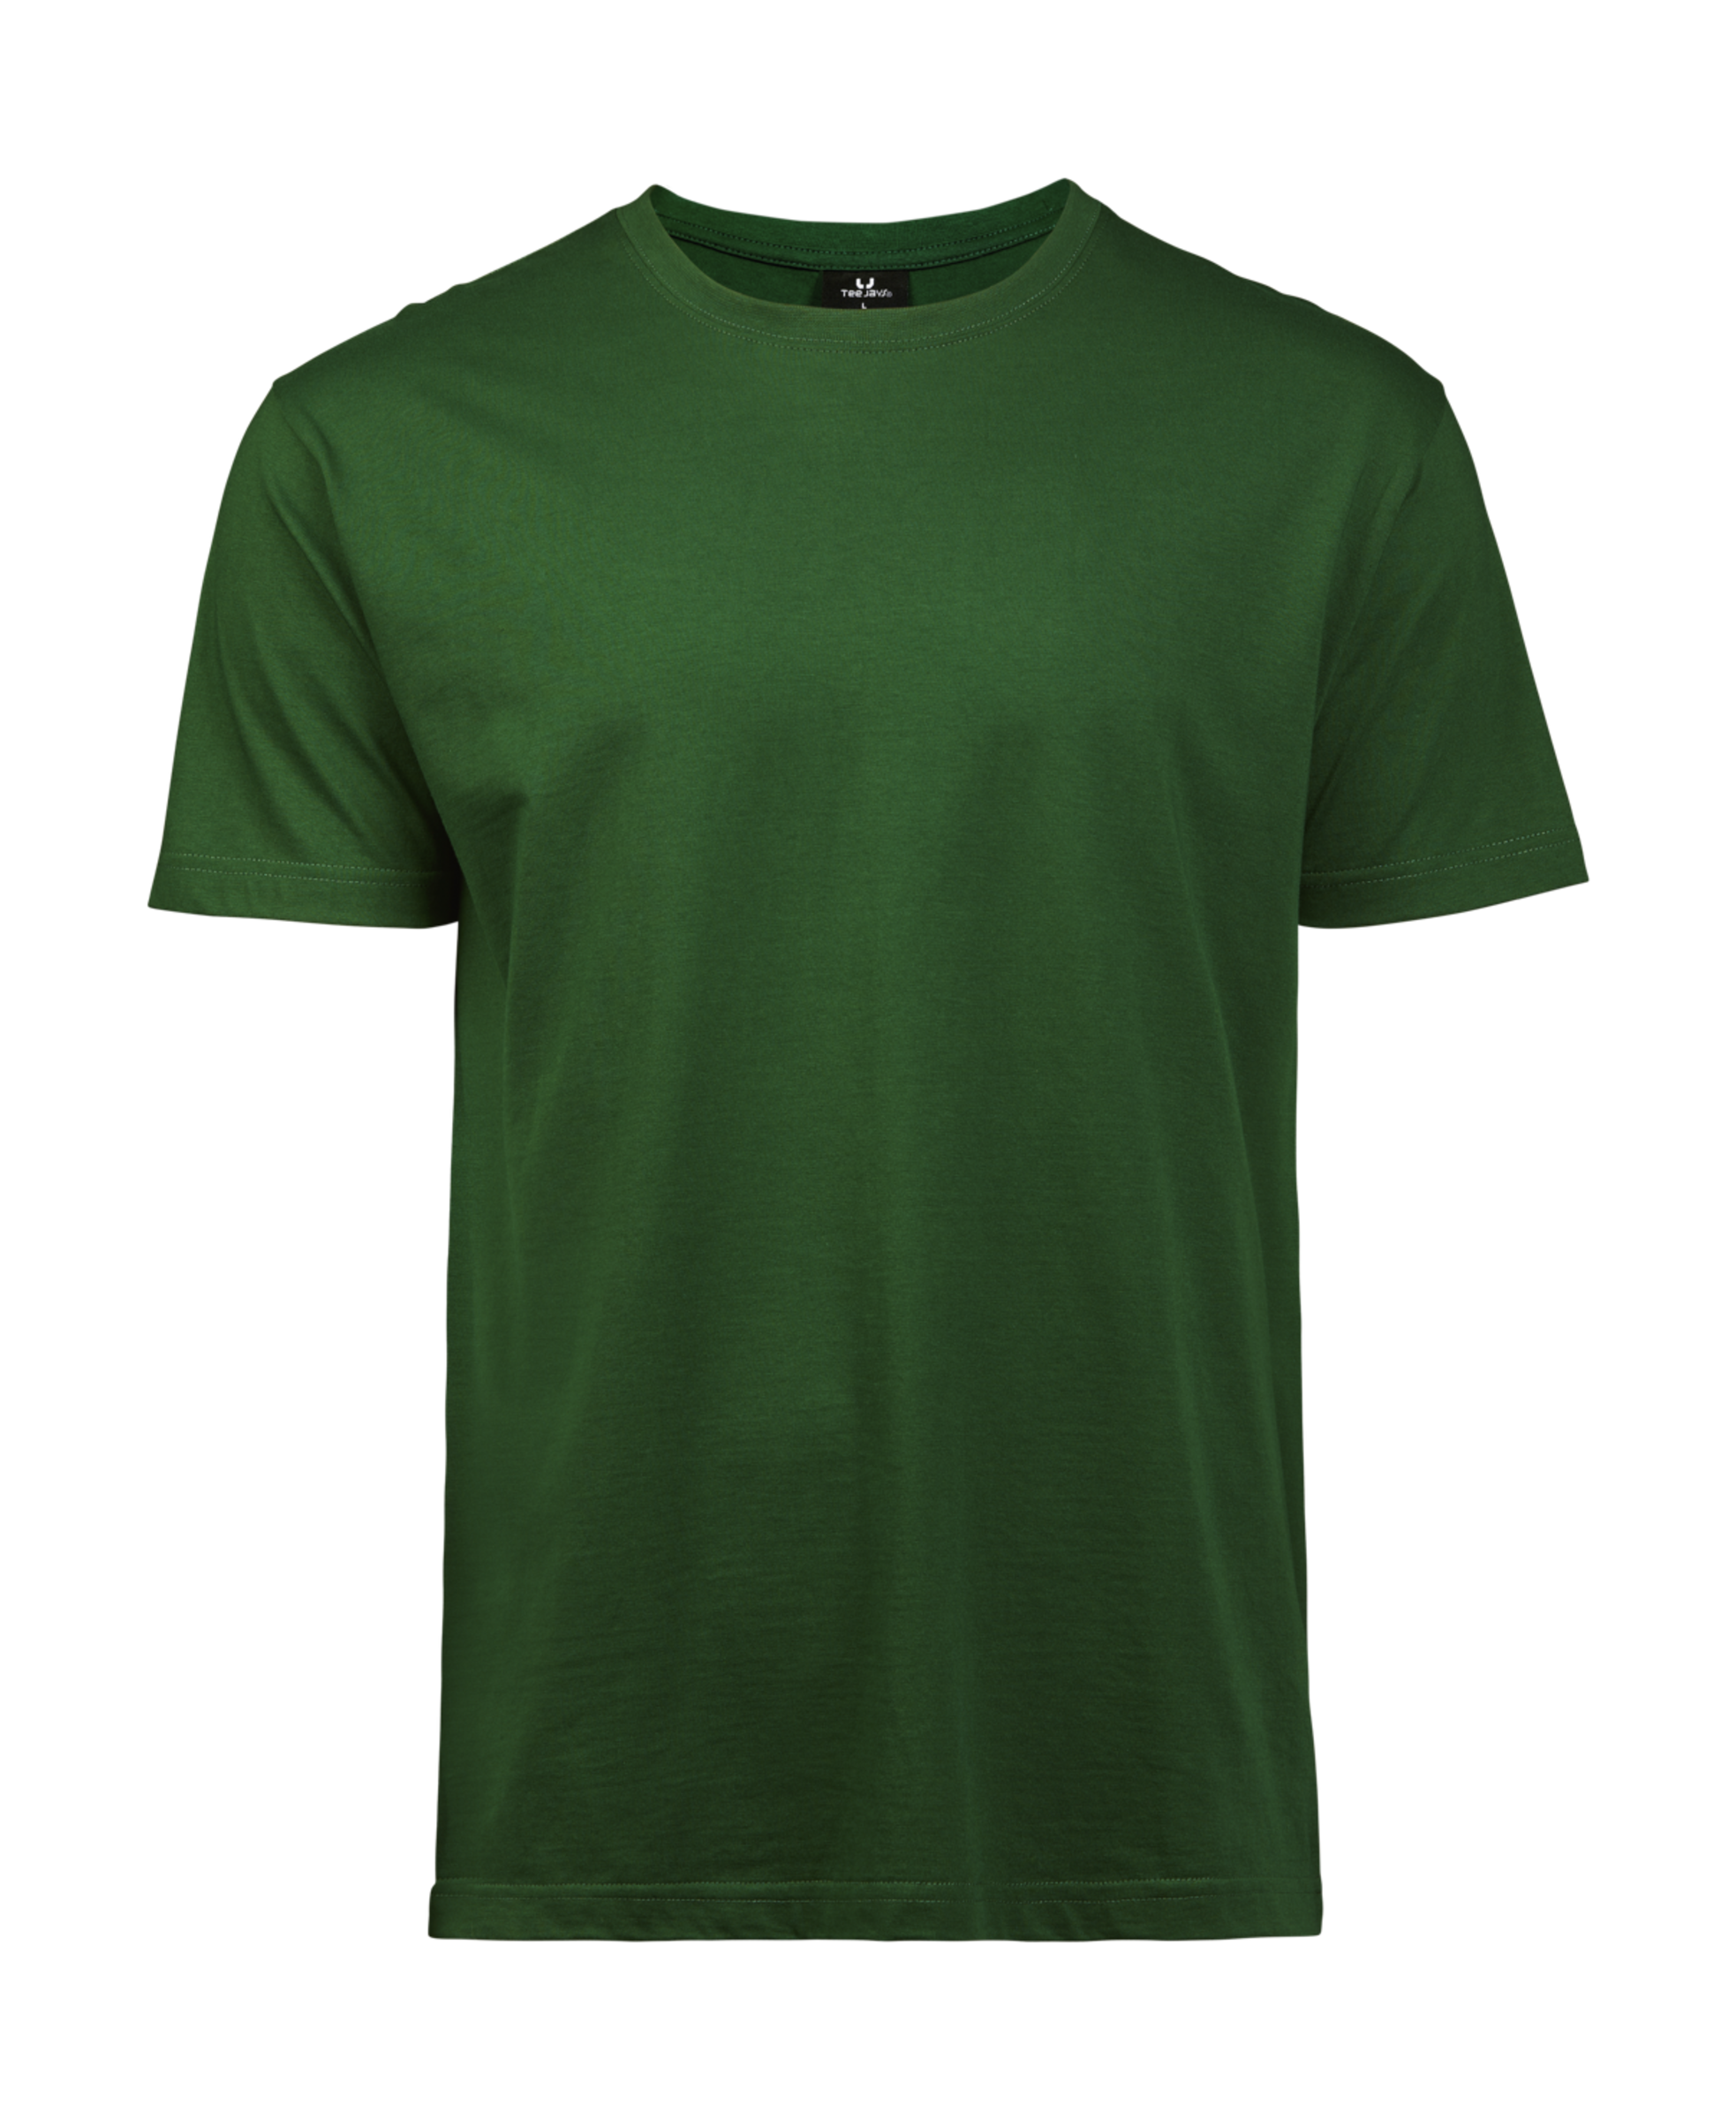 Sof Tee - FOREST GREEN